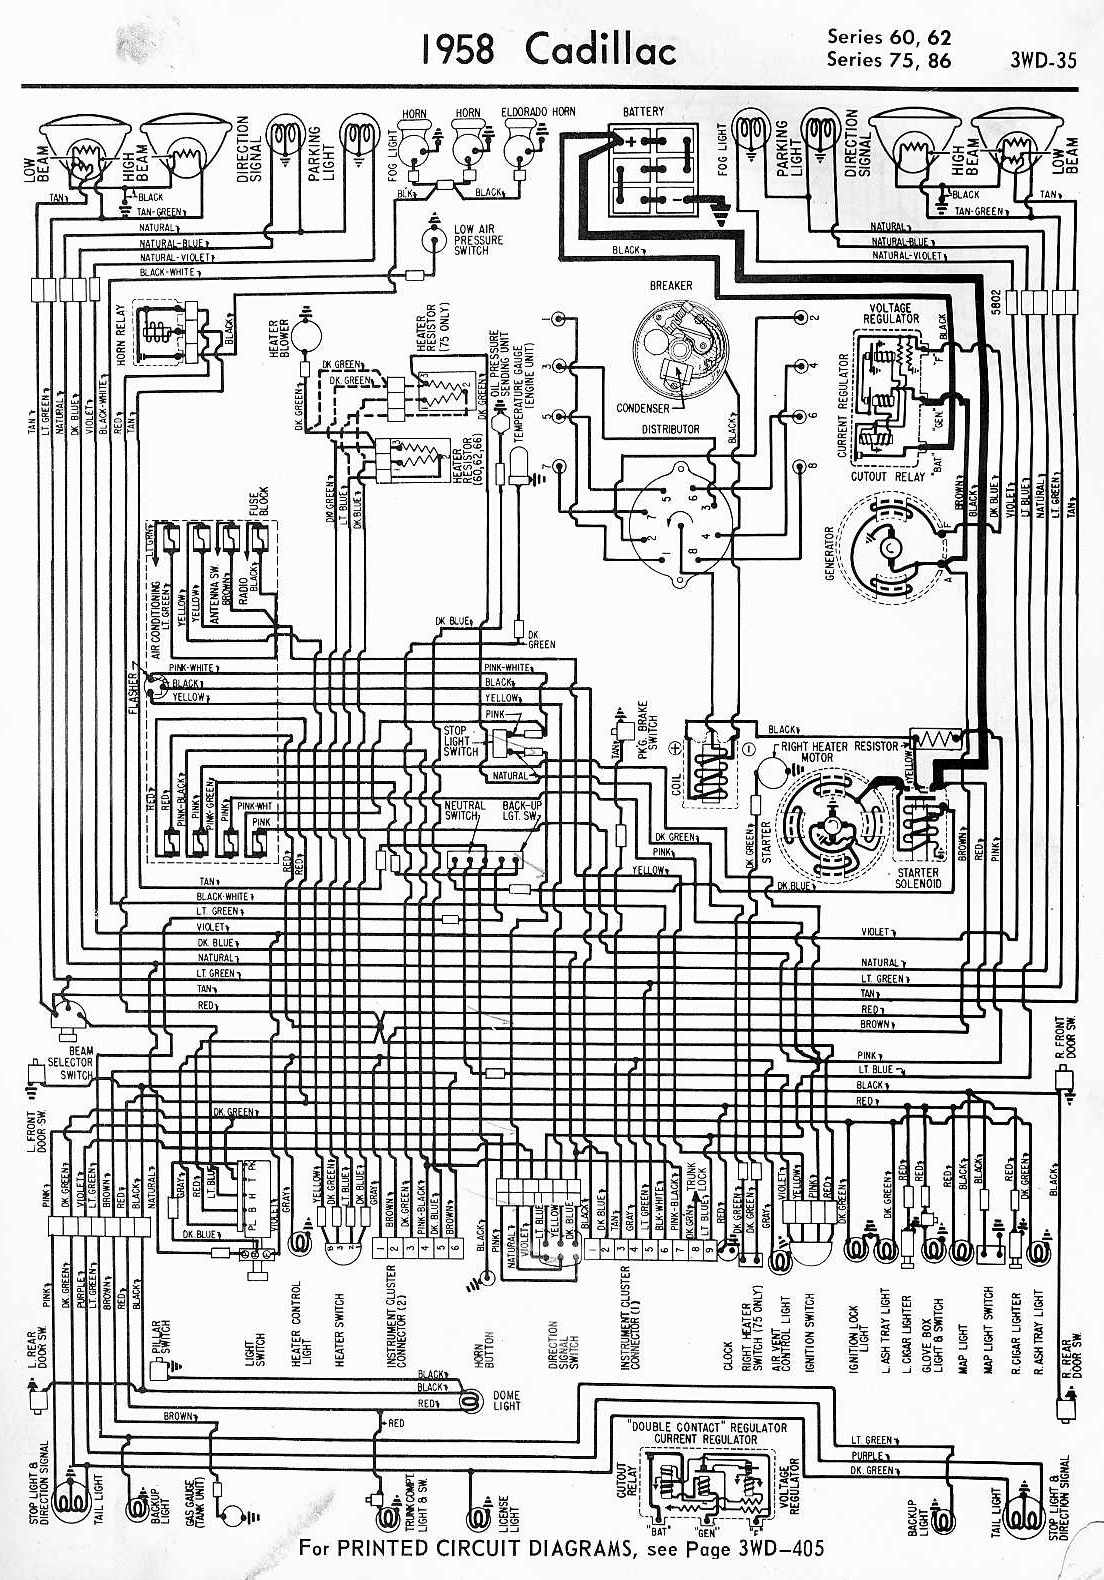 2003 Cadillac Cts Stereo Wiring Diagram from www.automotive-manuals.net